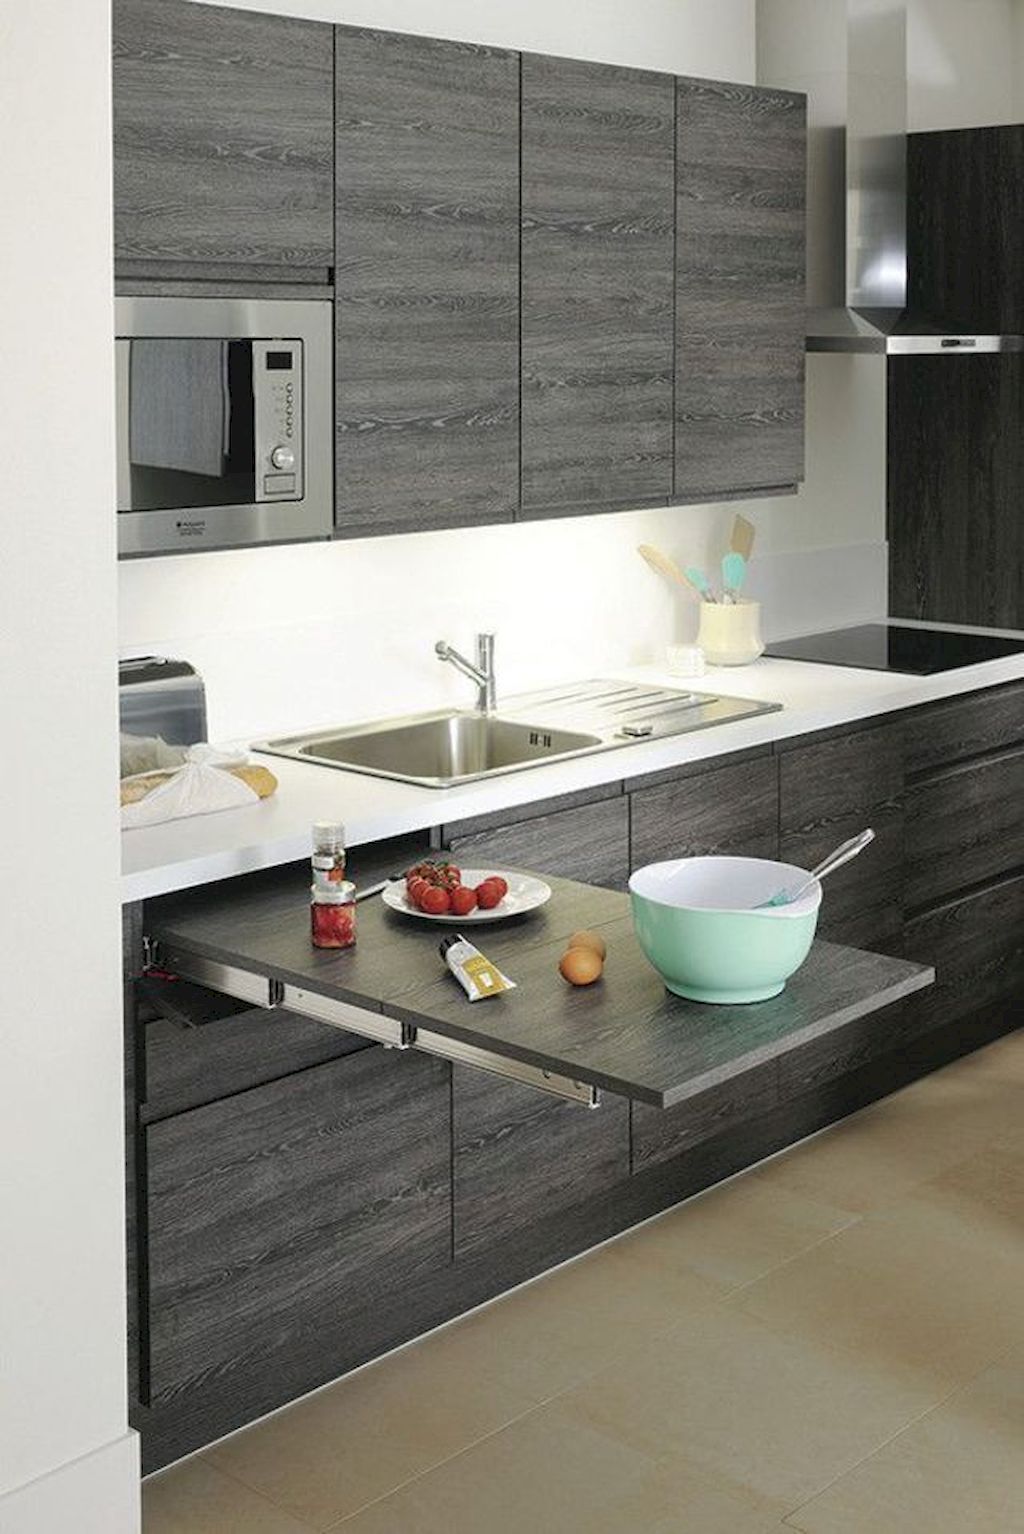 Awesome Fashionable Designs in Kitchen Cupboards For You to Select From